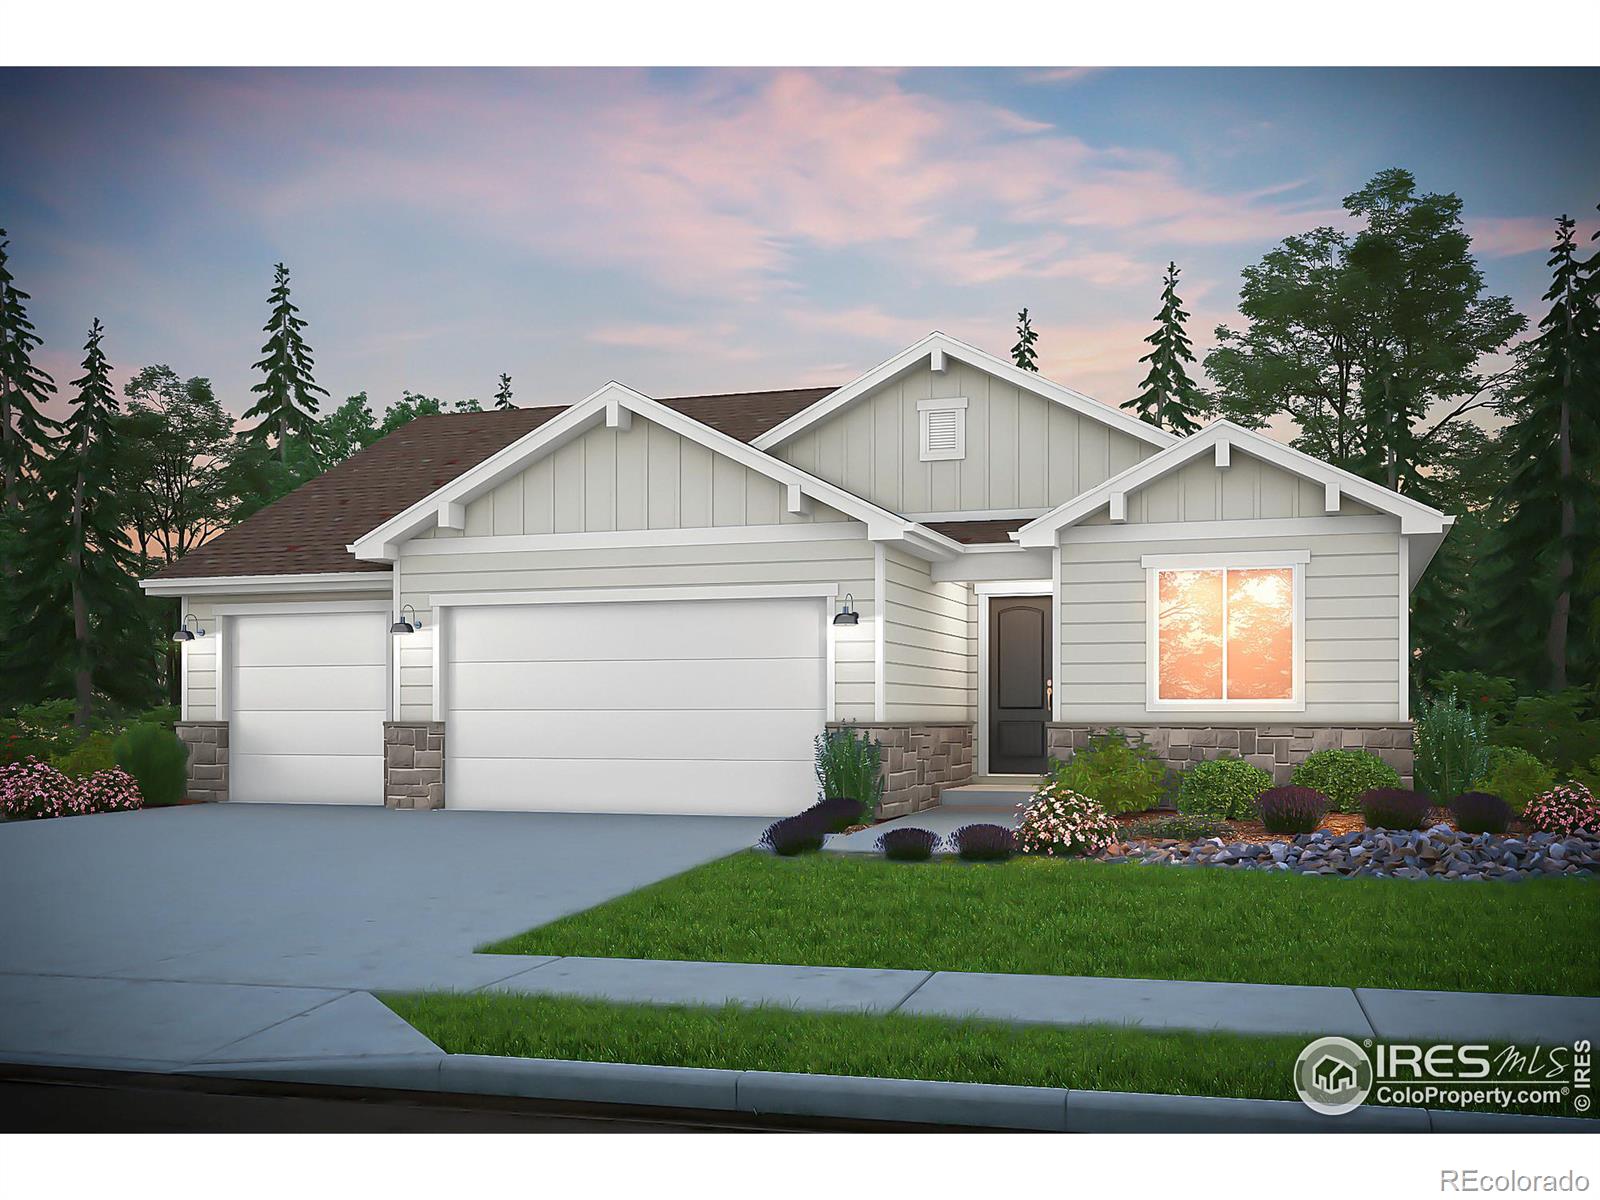 2914  Gangway Drive, fort collins MLS: 123456789986516 Beds: 4 Baths: 3 Price: $788,690